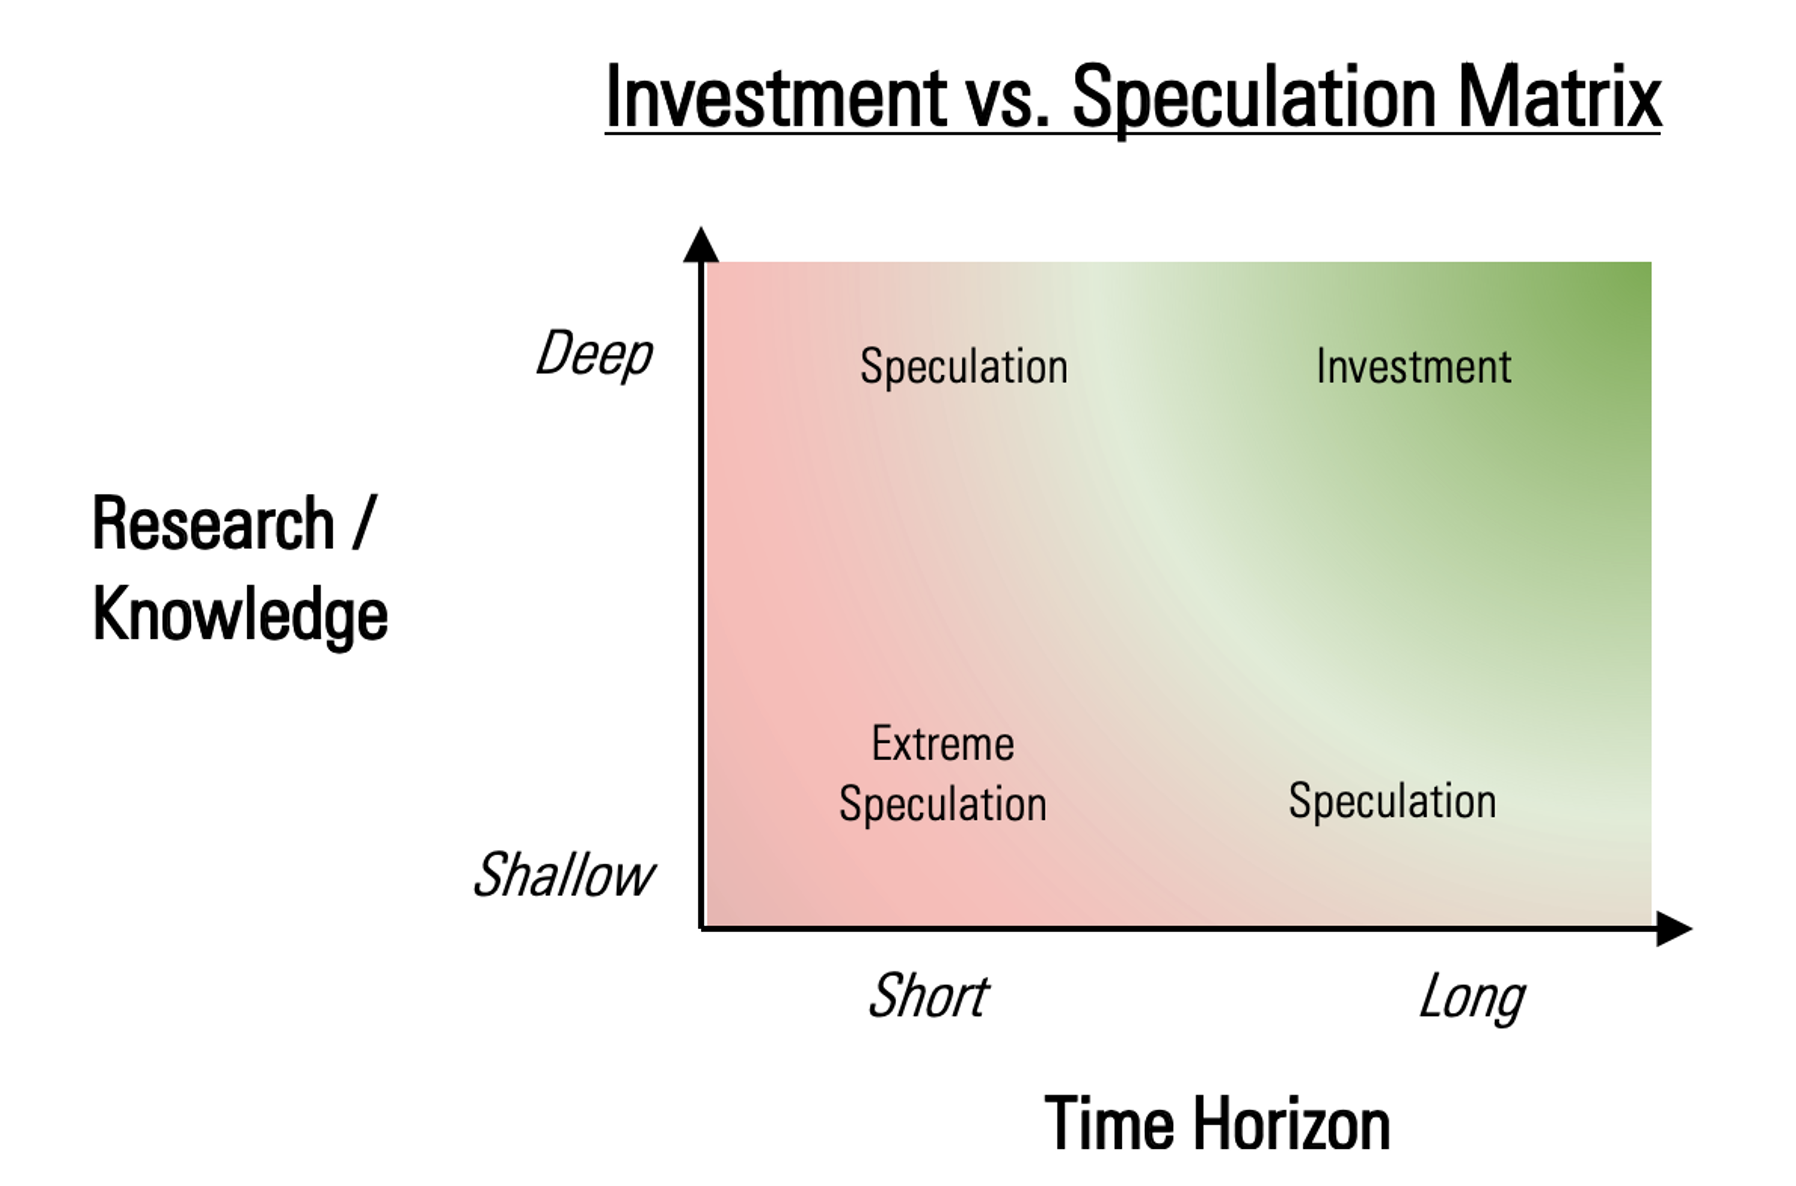 Shows a graph that illustrates the 2-dimensional relationship between knowledge and time horizon. The more knowledge or time, the lower the uncertainty of the outcome.